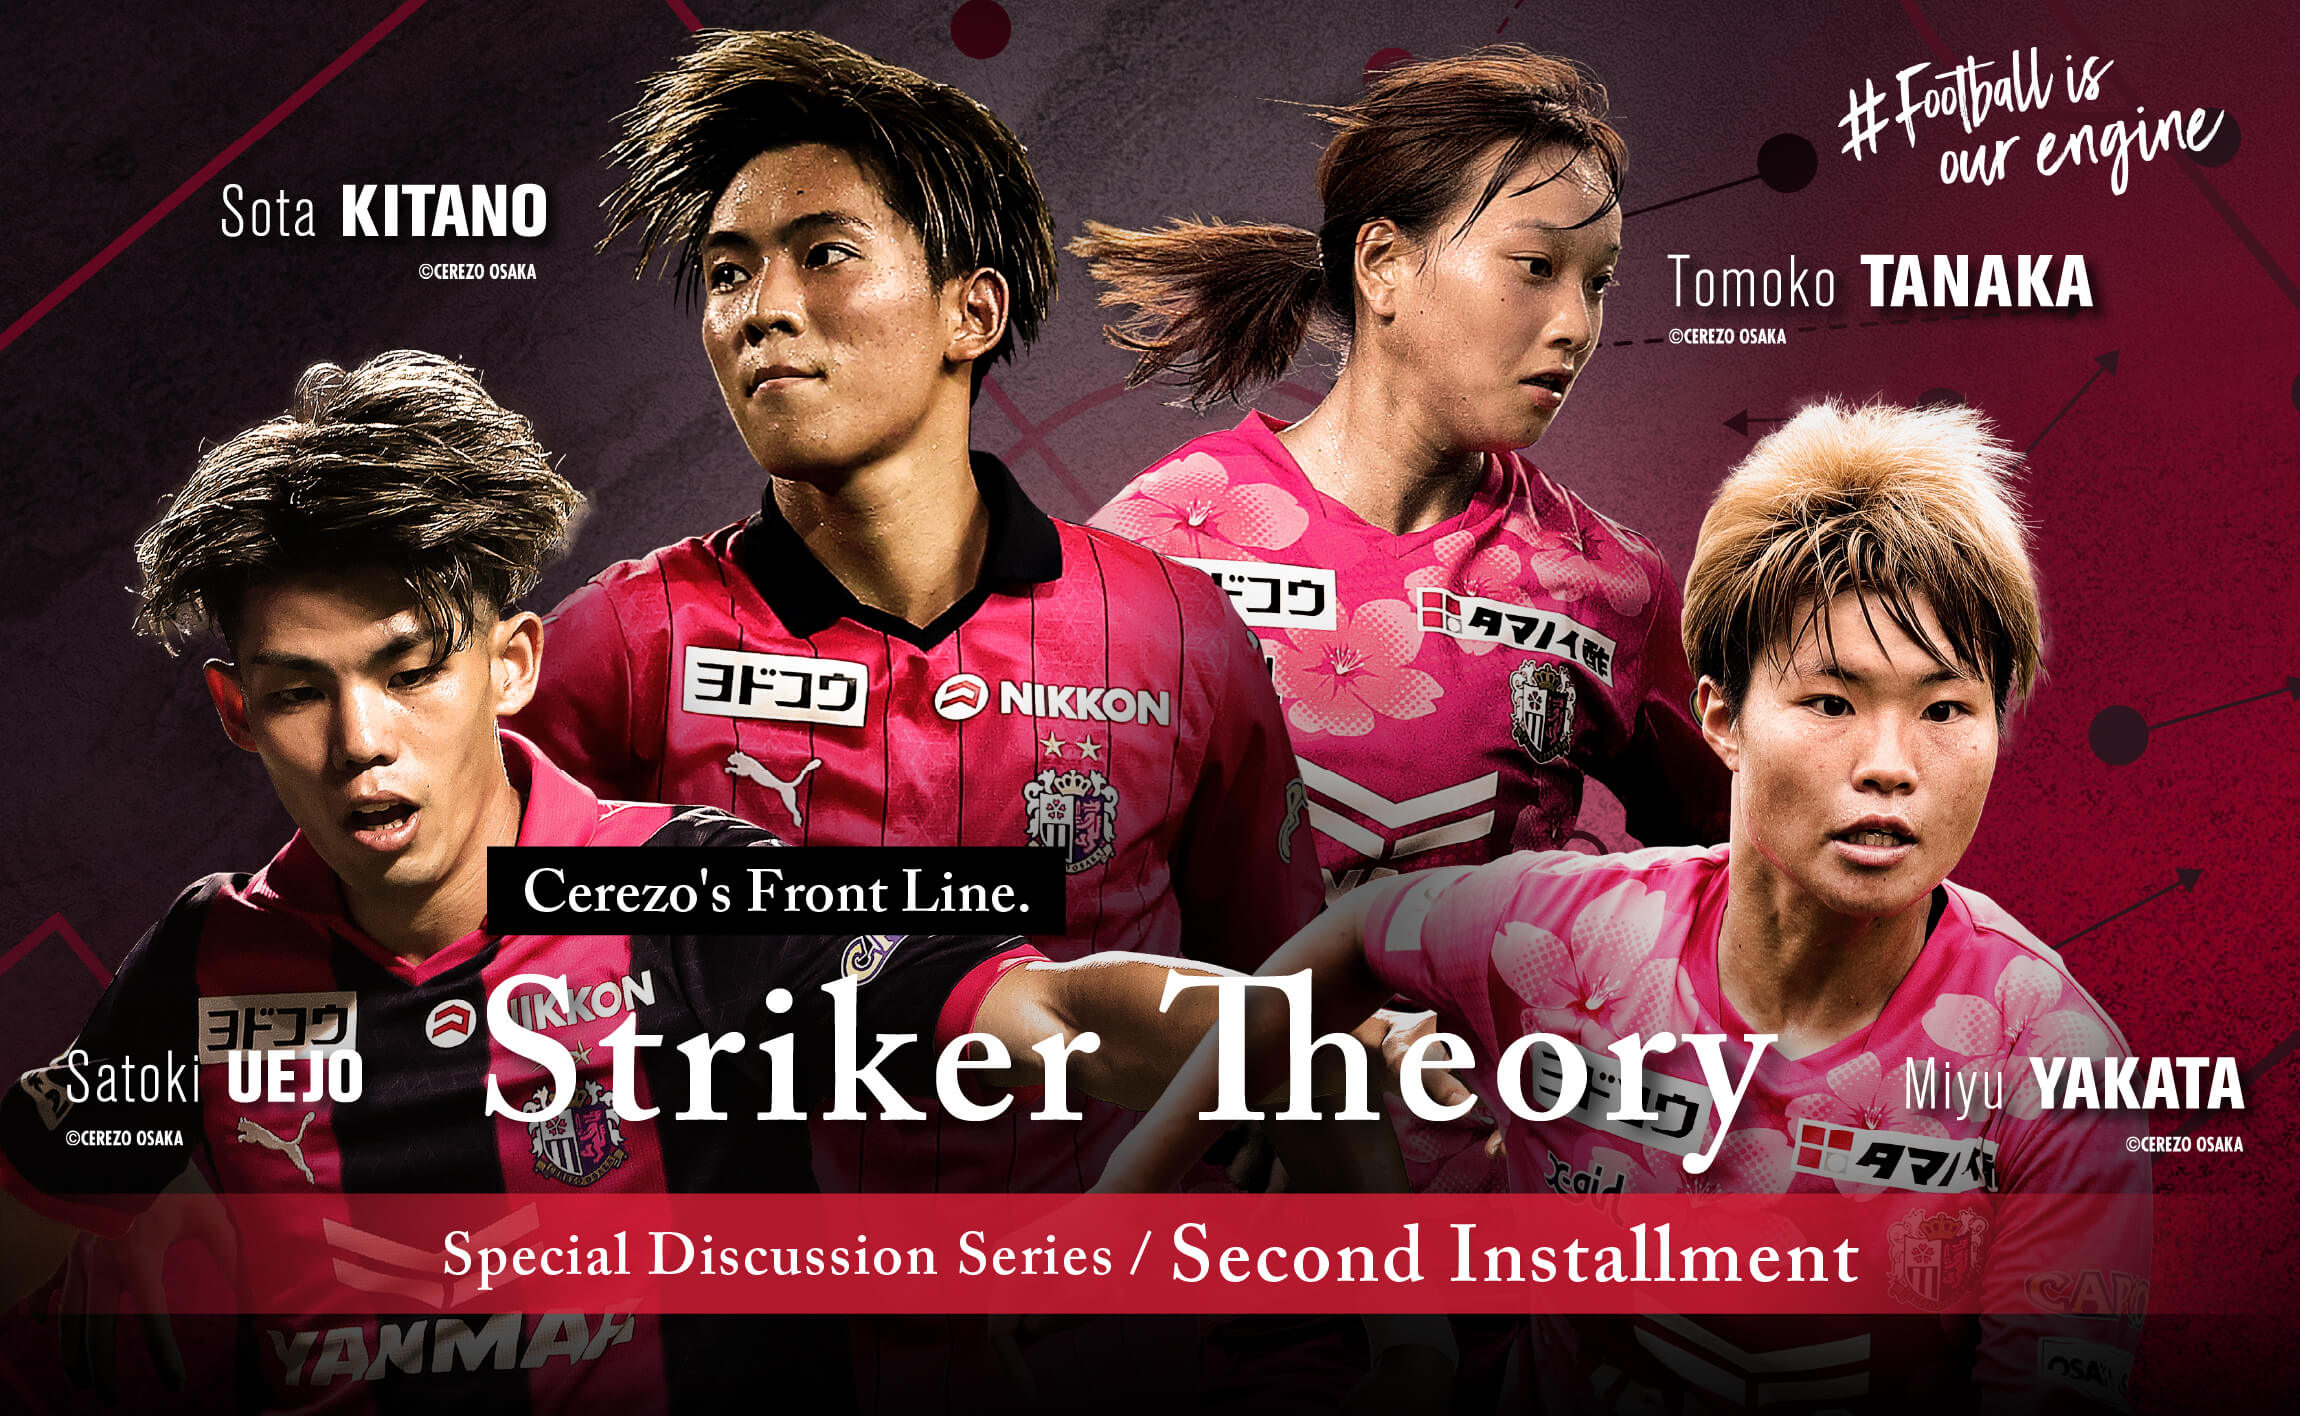 Cerezo's Front Line. Striker Theory / Special Discussion Series / Second Installment